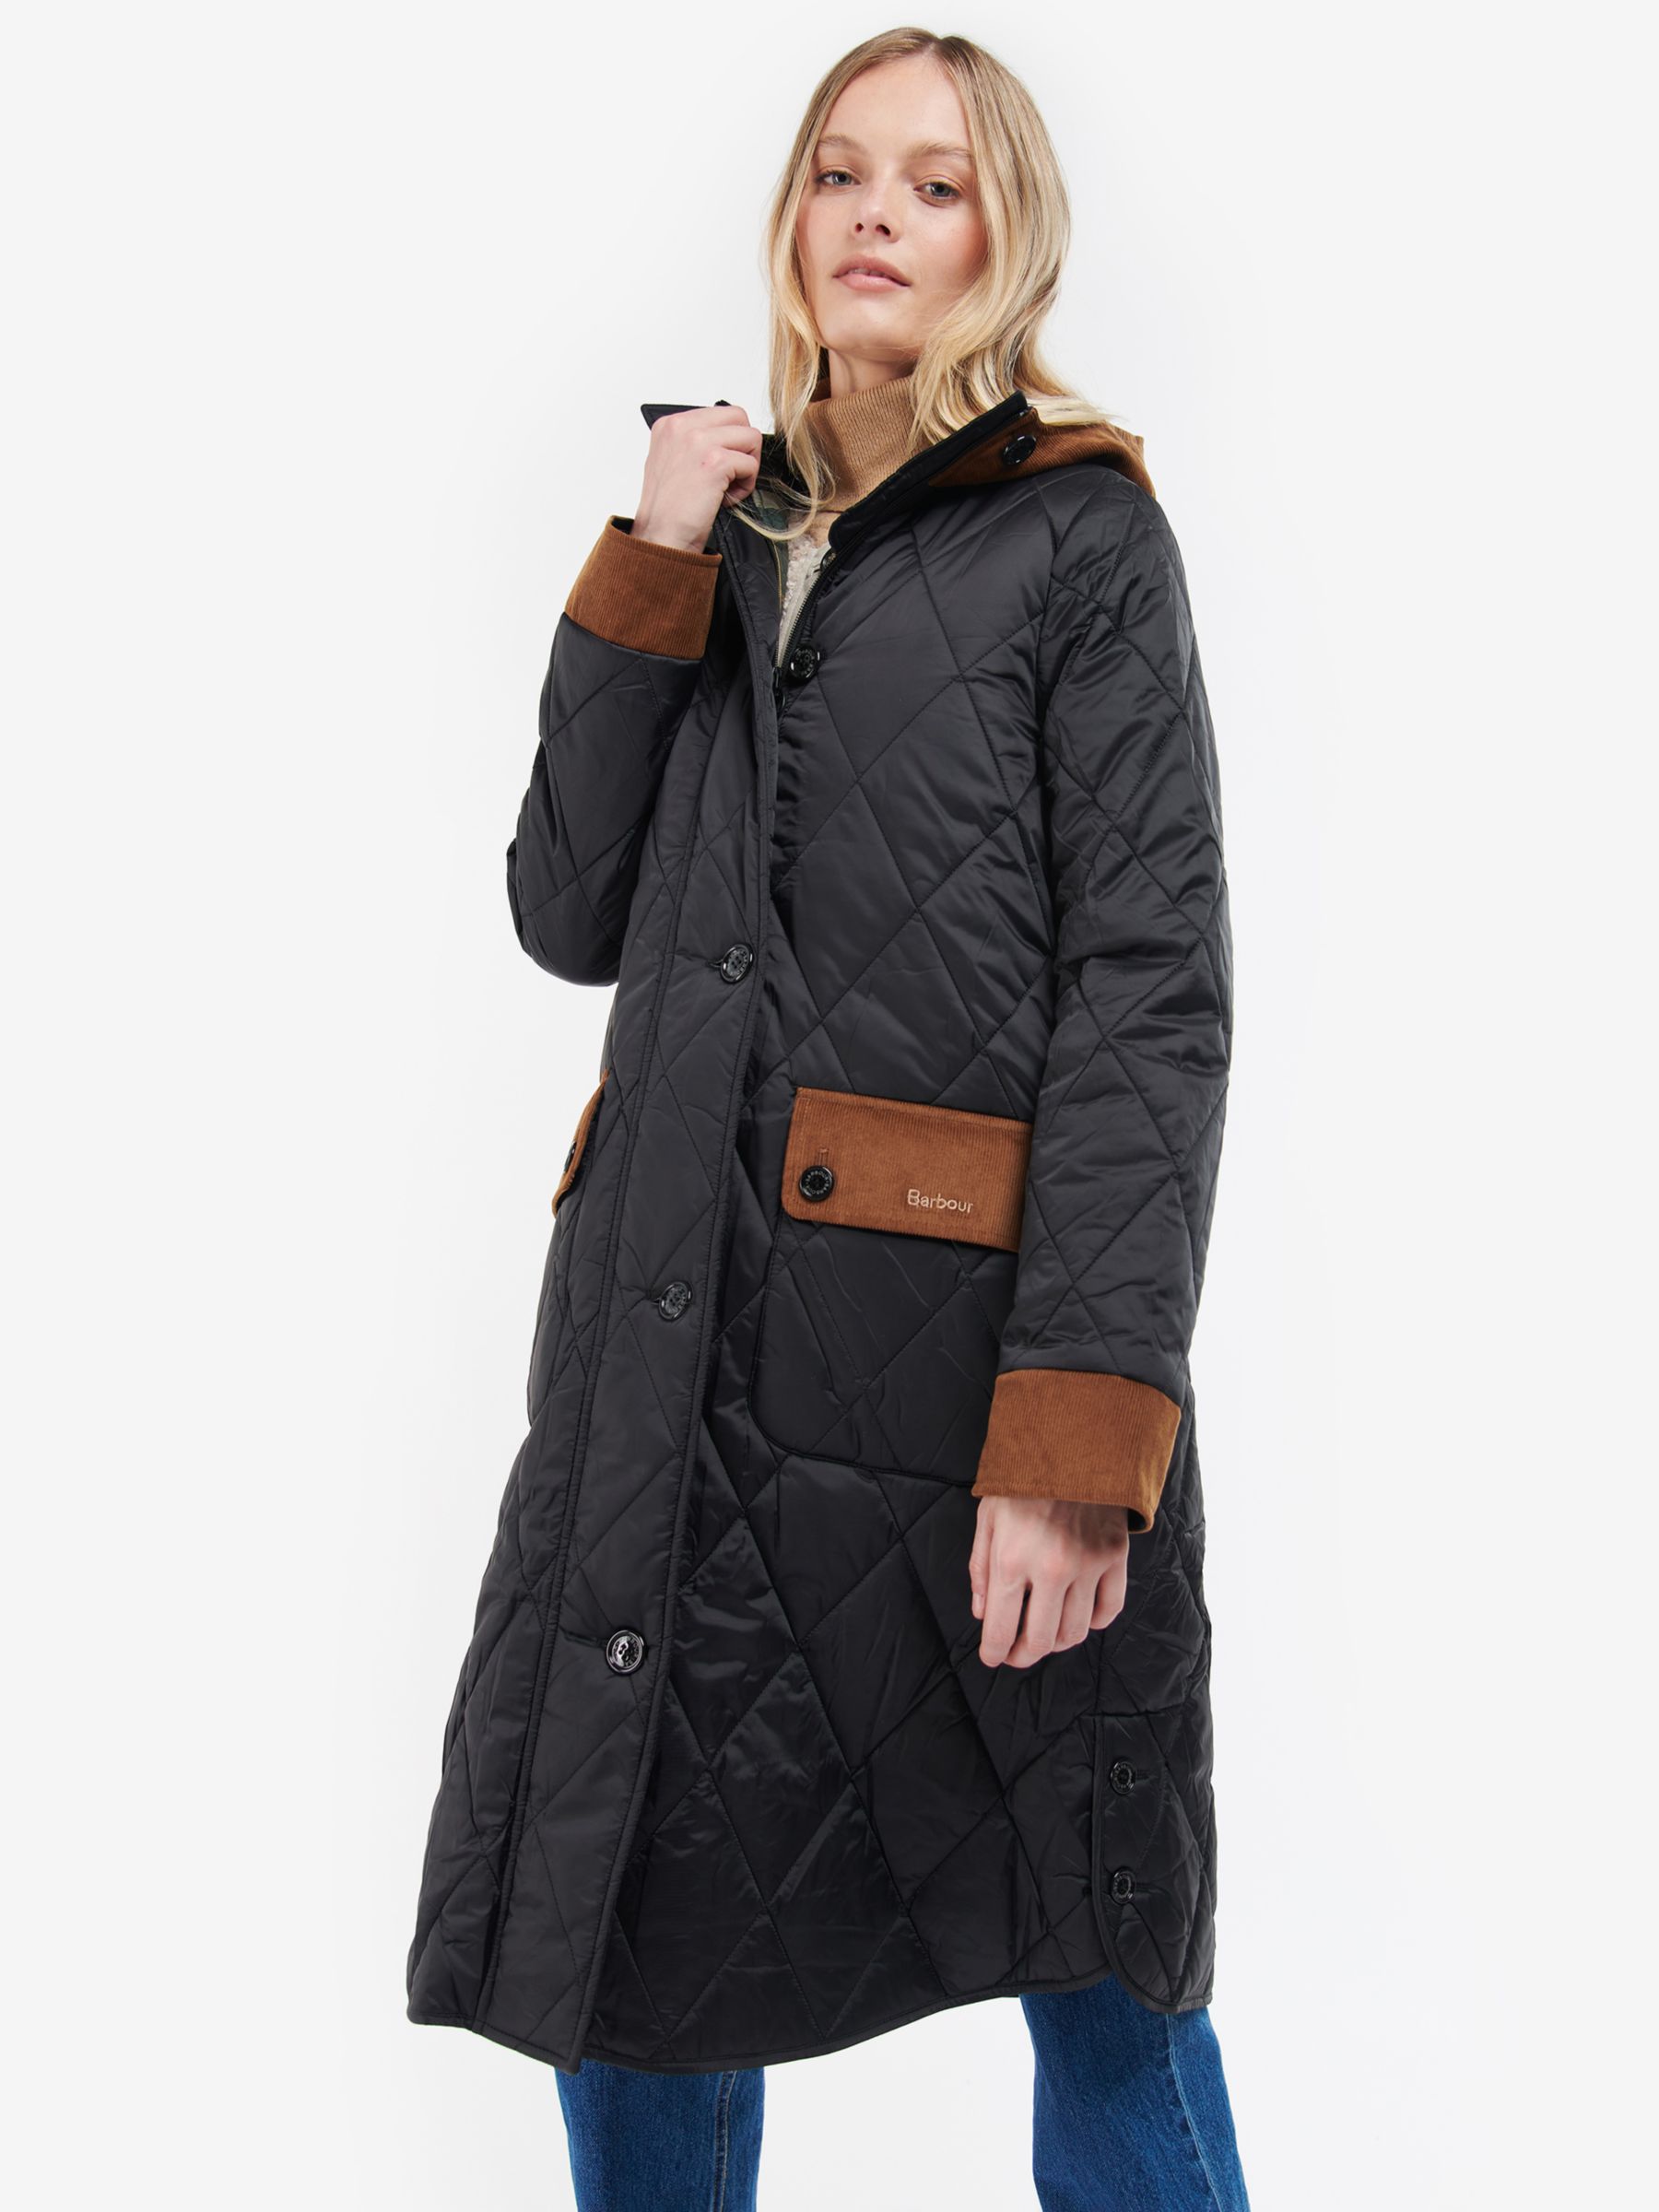 Barbour Mickley Long Quilted Coat, Black at John Lewis & Partners